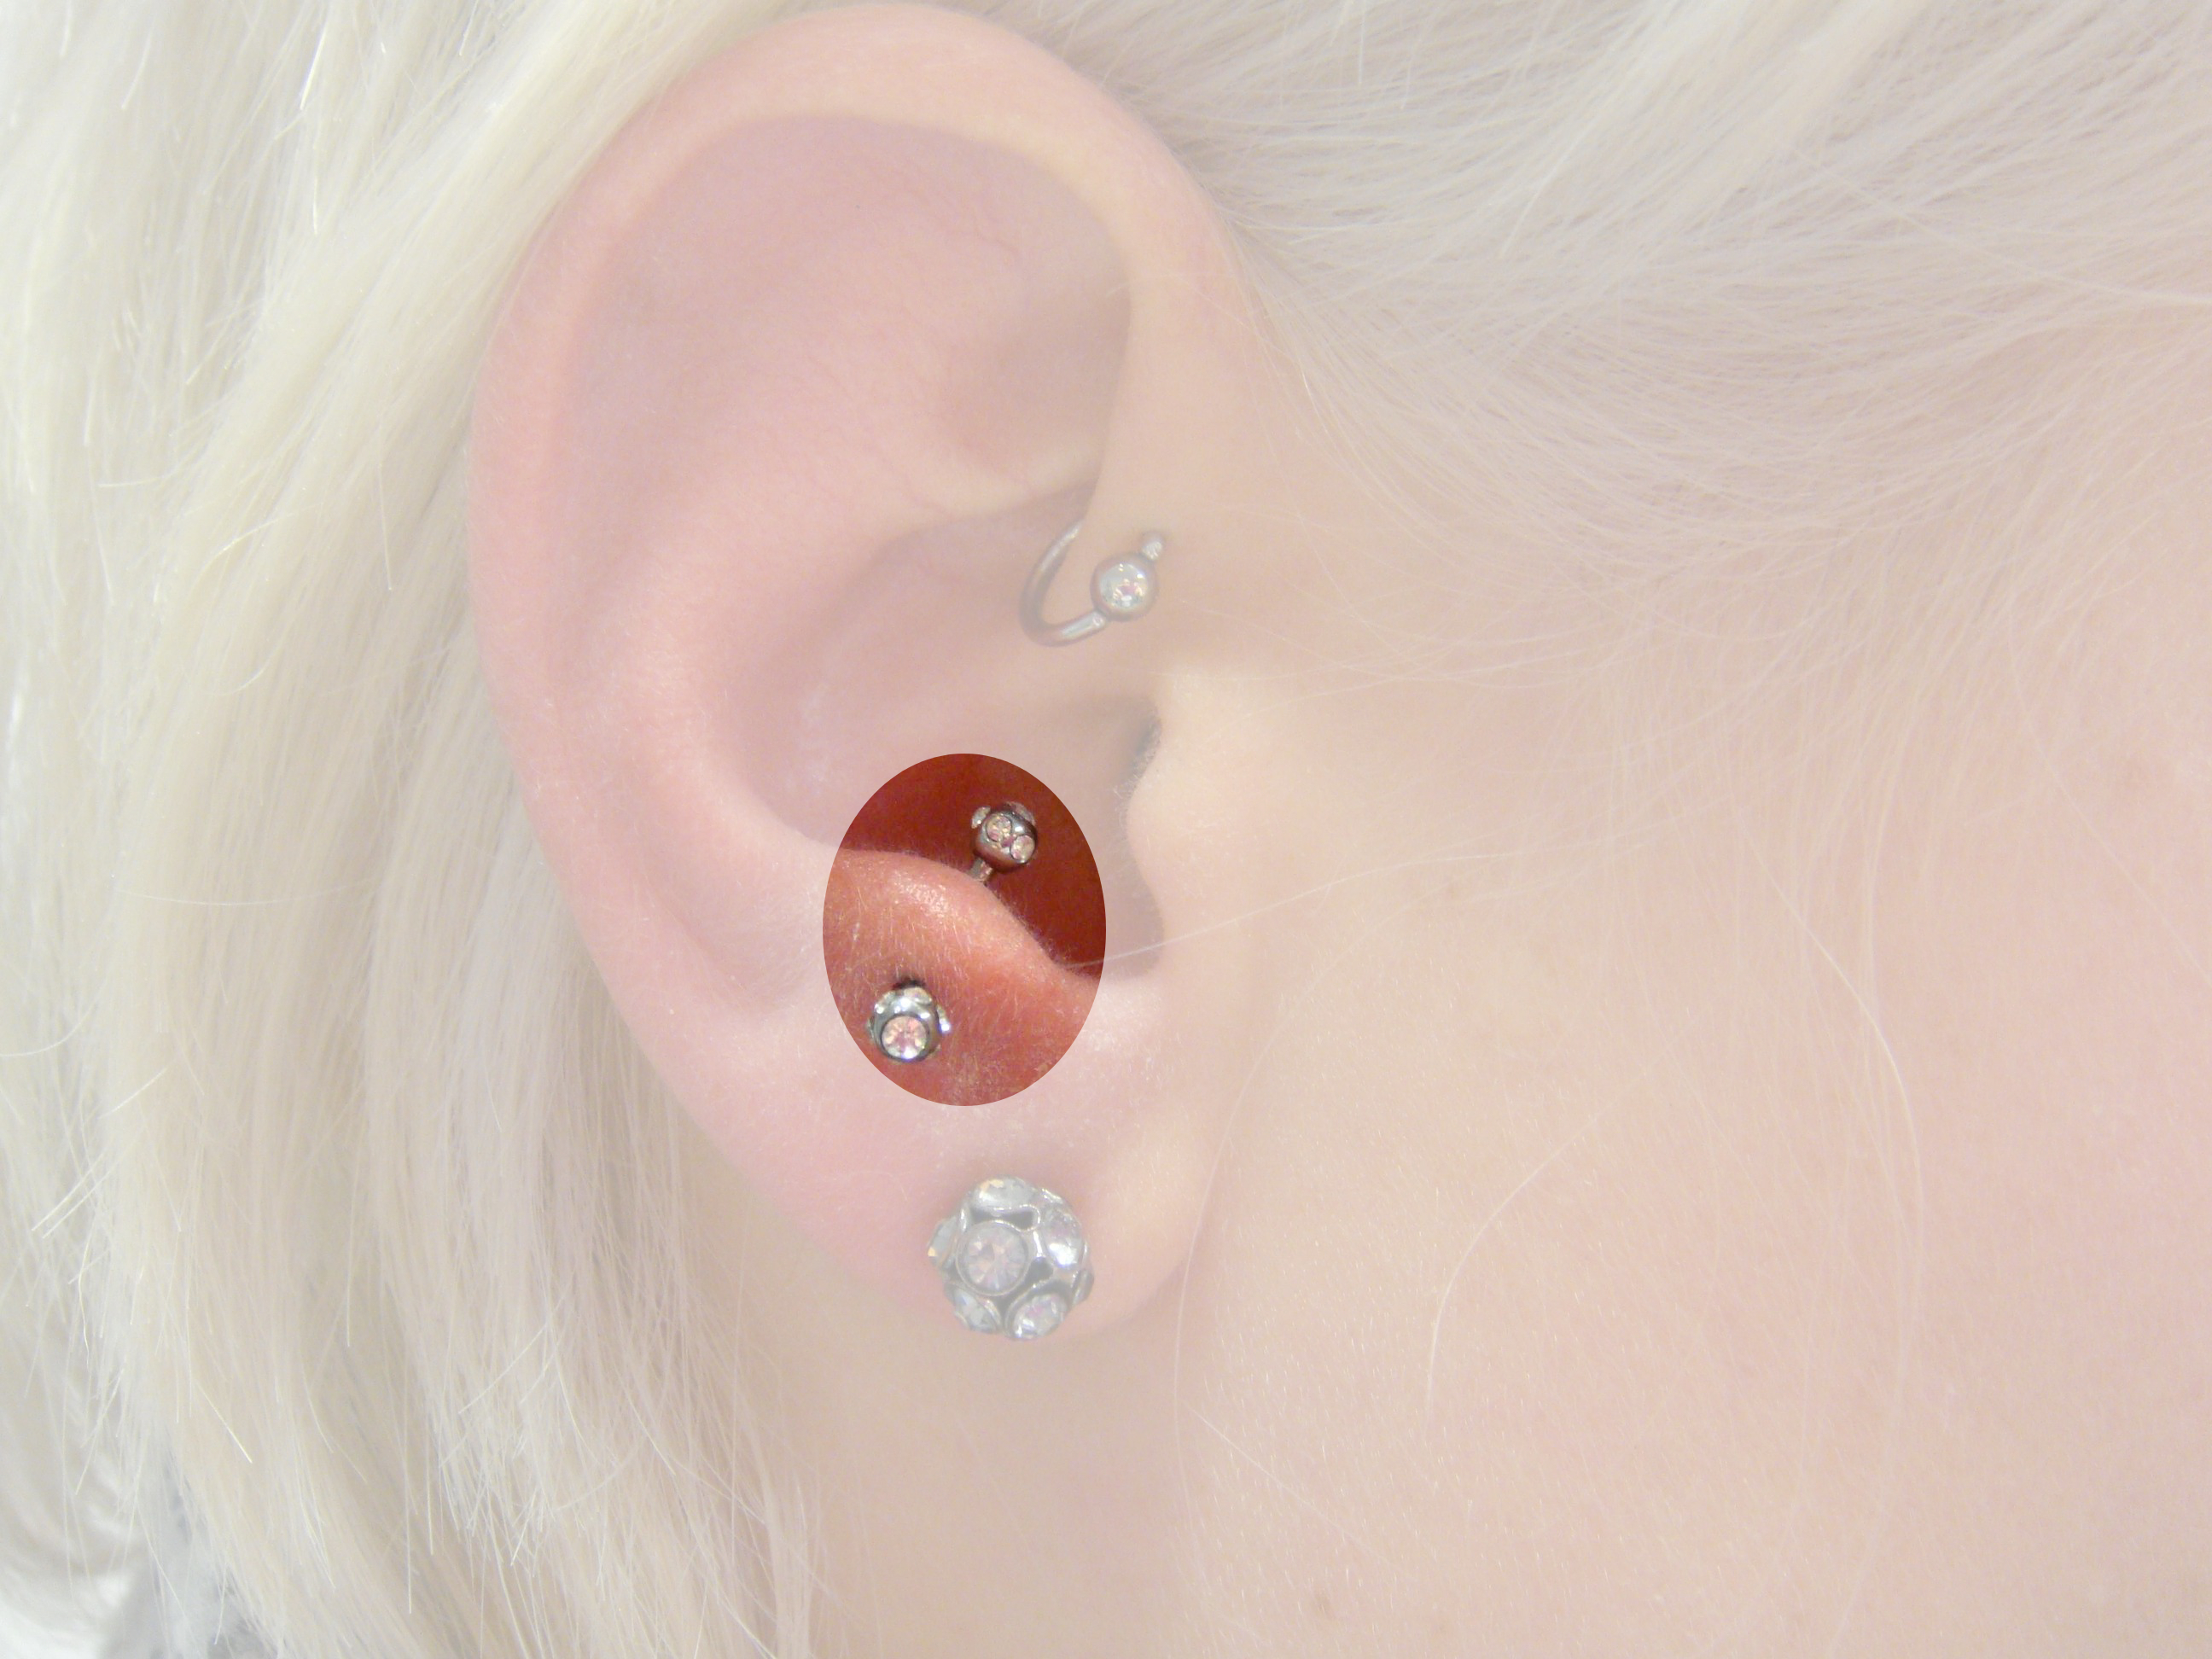 Ear Piercing Ideas and How to Clean Ear Piercing